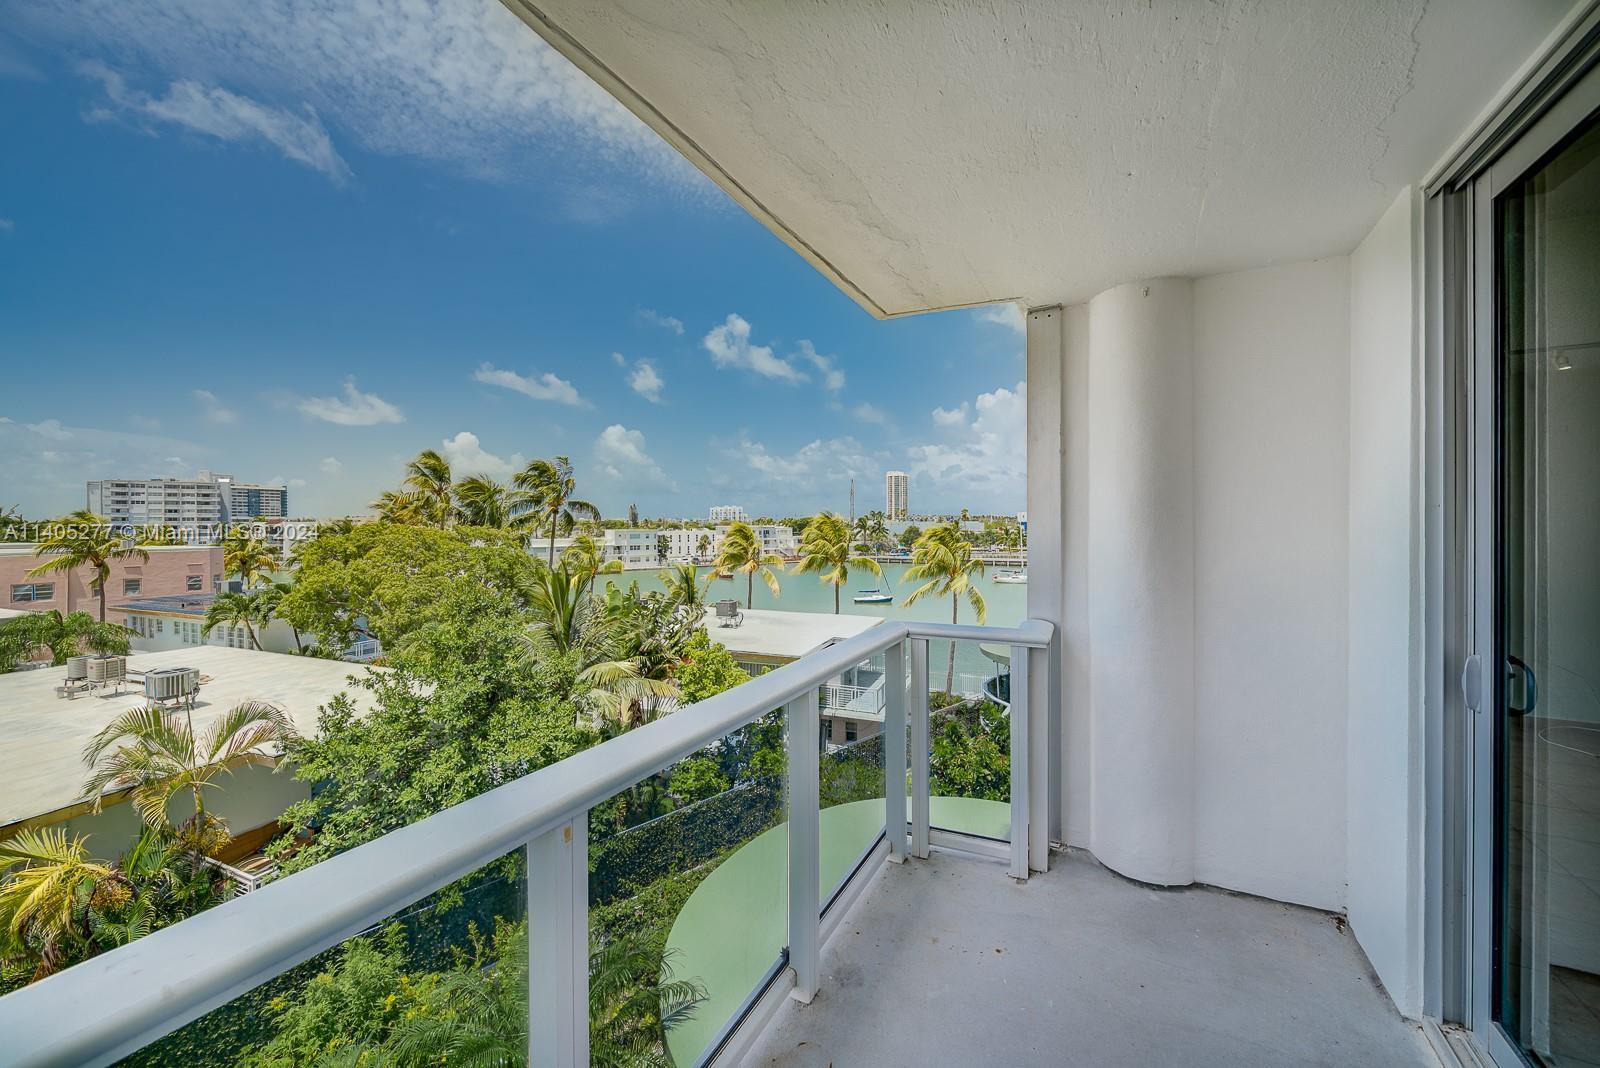 Come and enjoy the beautiful King Cole building just minutes from Miami Beach.  Extremely spacious 2